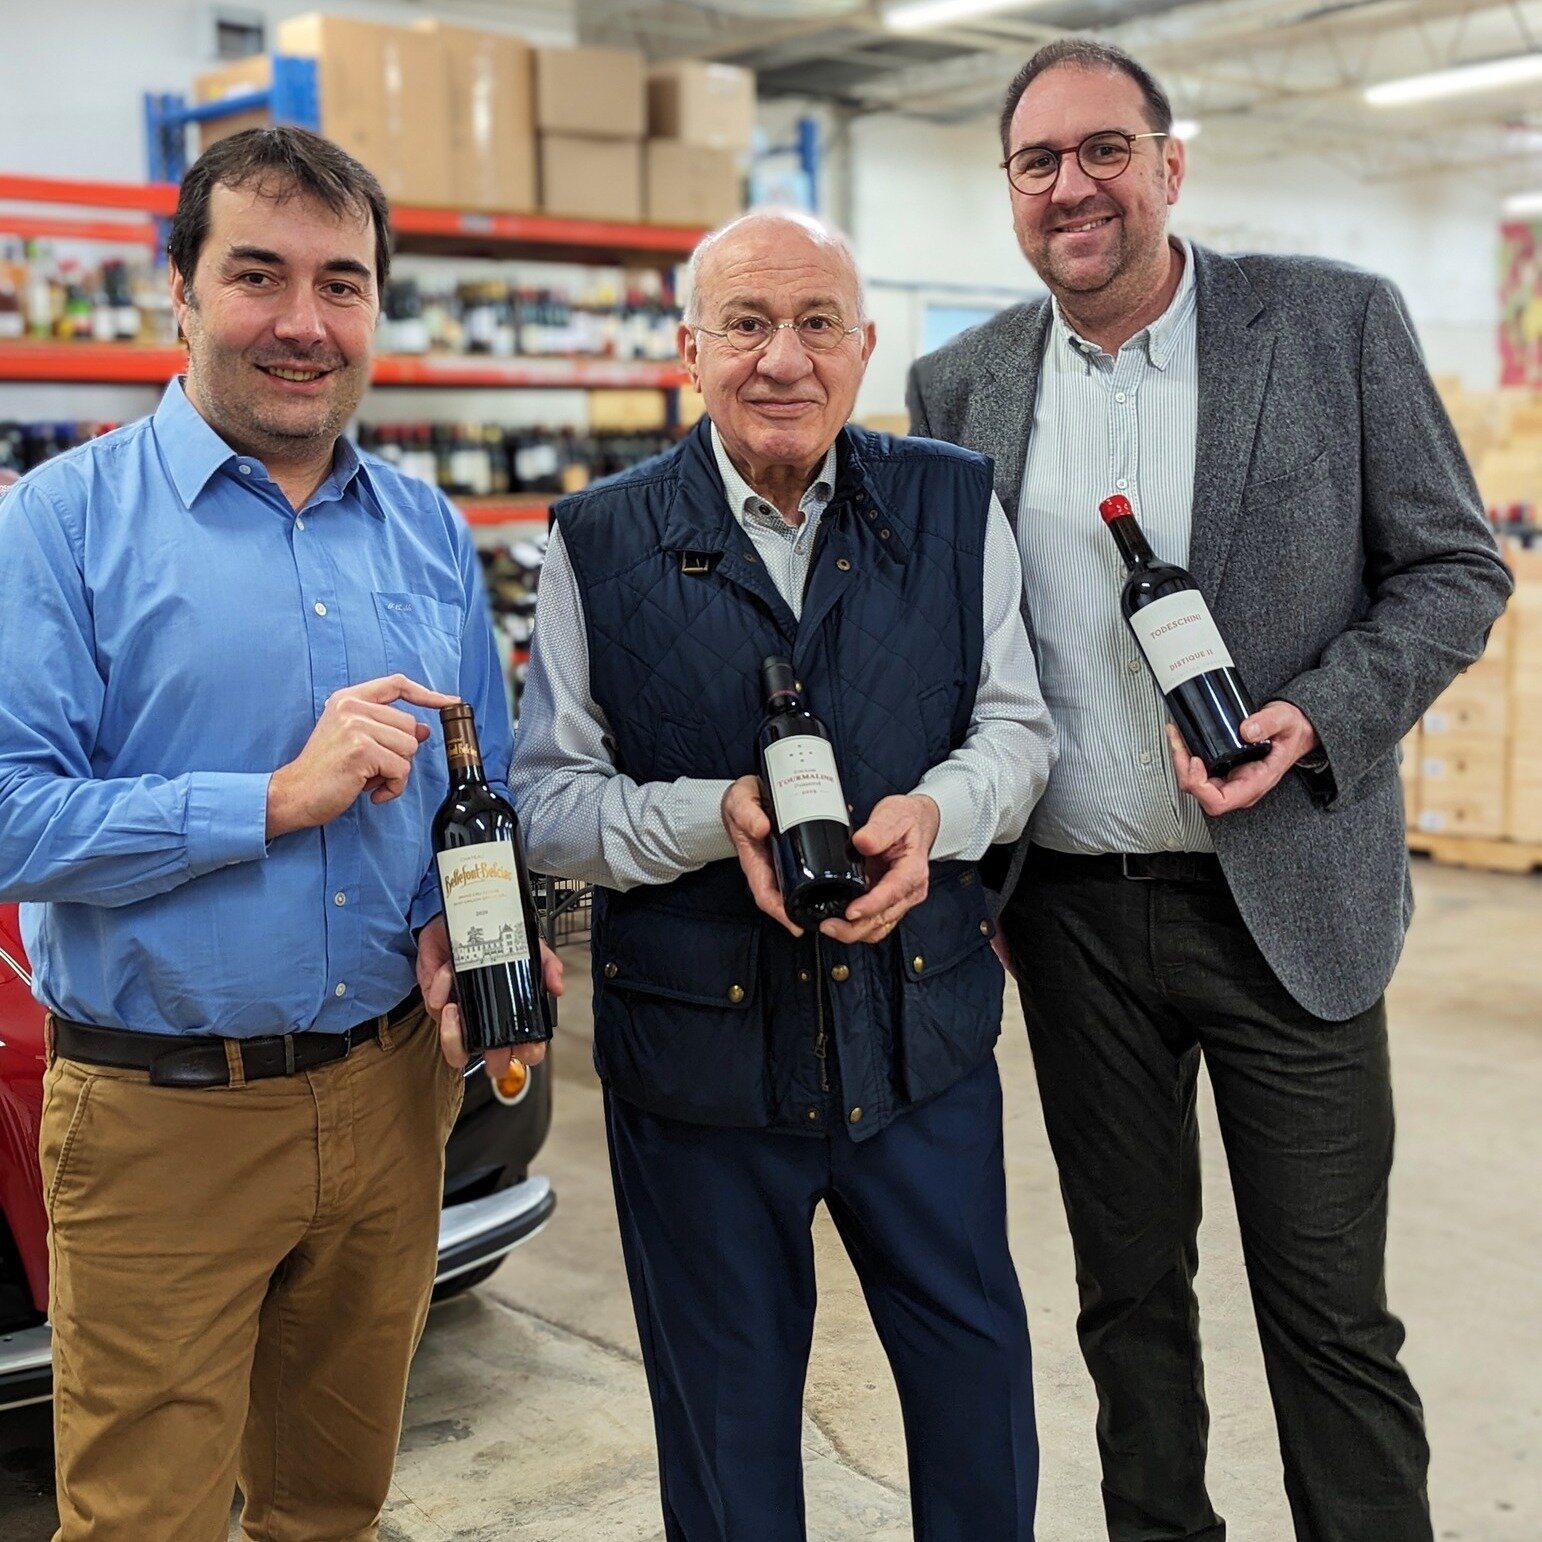 A big thank you to Jean-Christophe Meyrou, General Manager of Vignobles K Group, and Yann Todeschini co-owner of Famille Todeschini. While doing market work in the DFW area they were kind enough to lead presentations and tastings here at MISA HQ. 

F